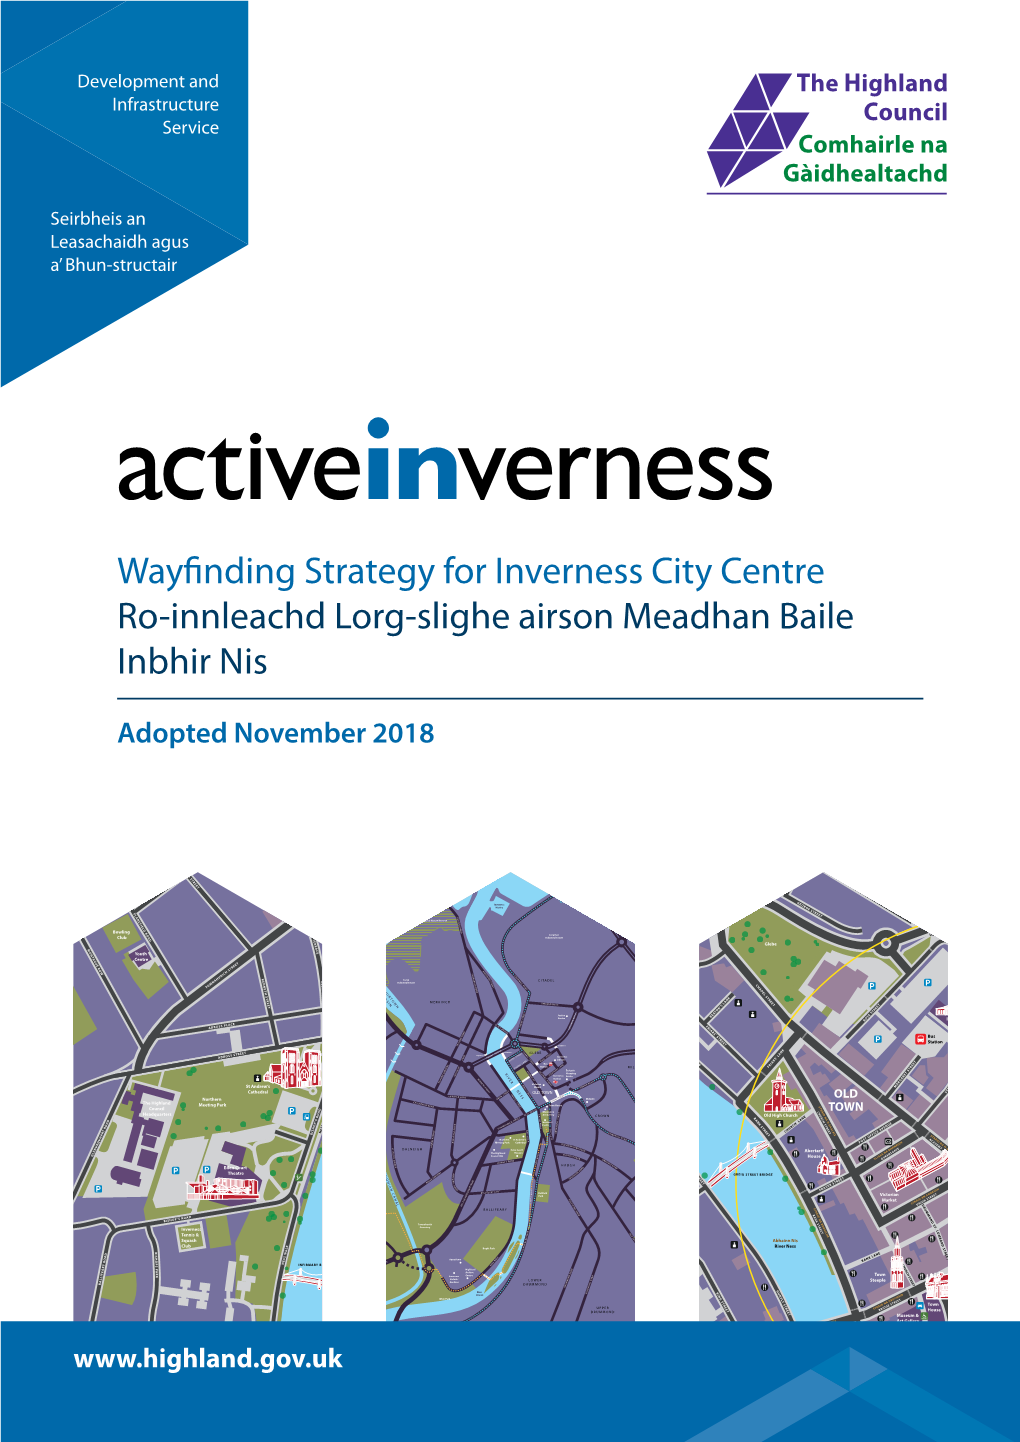 Wayfinding Strategy for Inverness City Centre the Highland Council Wayfinding Strategy for Inverness City Centre